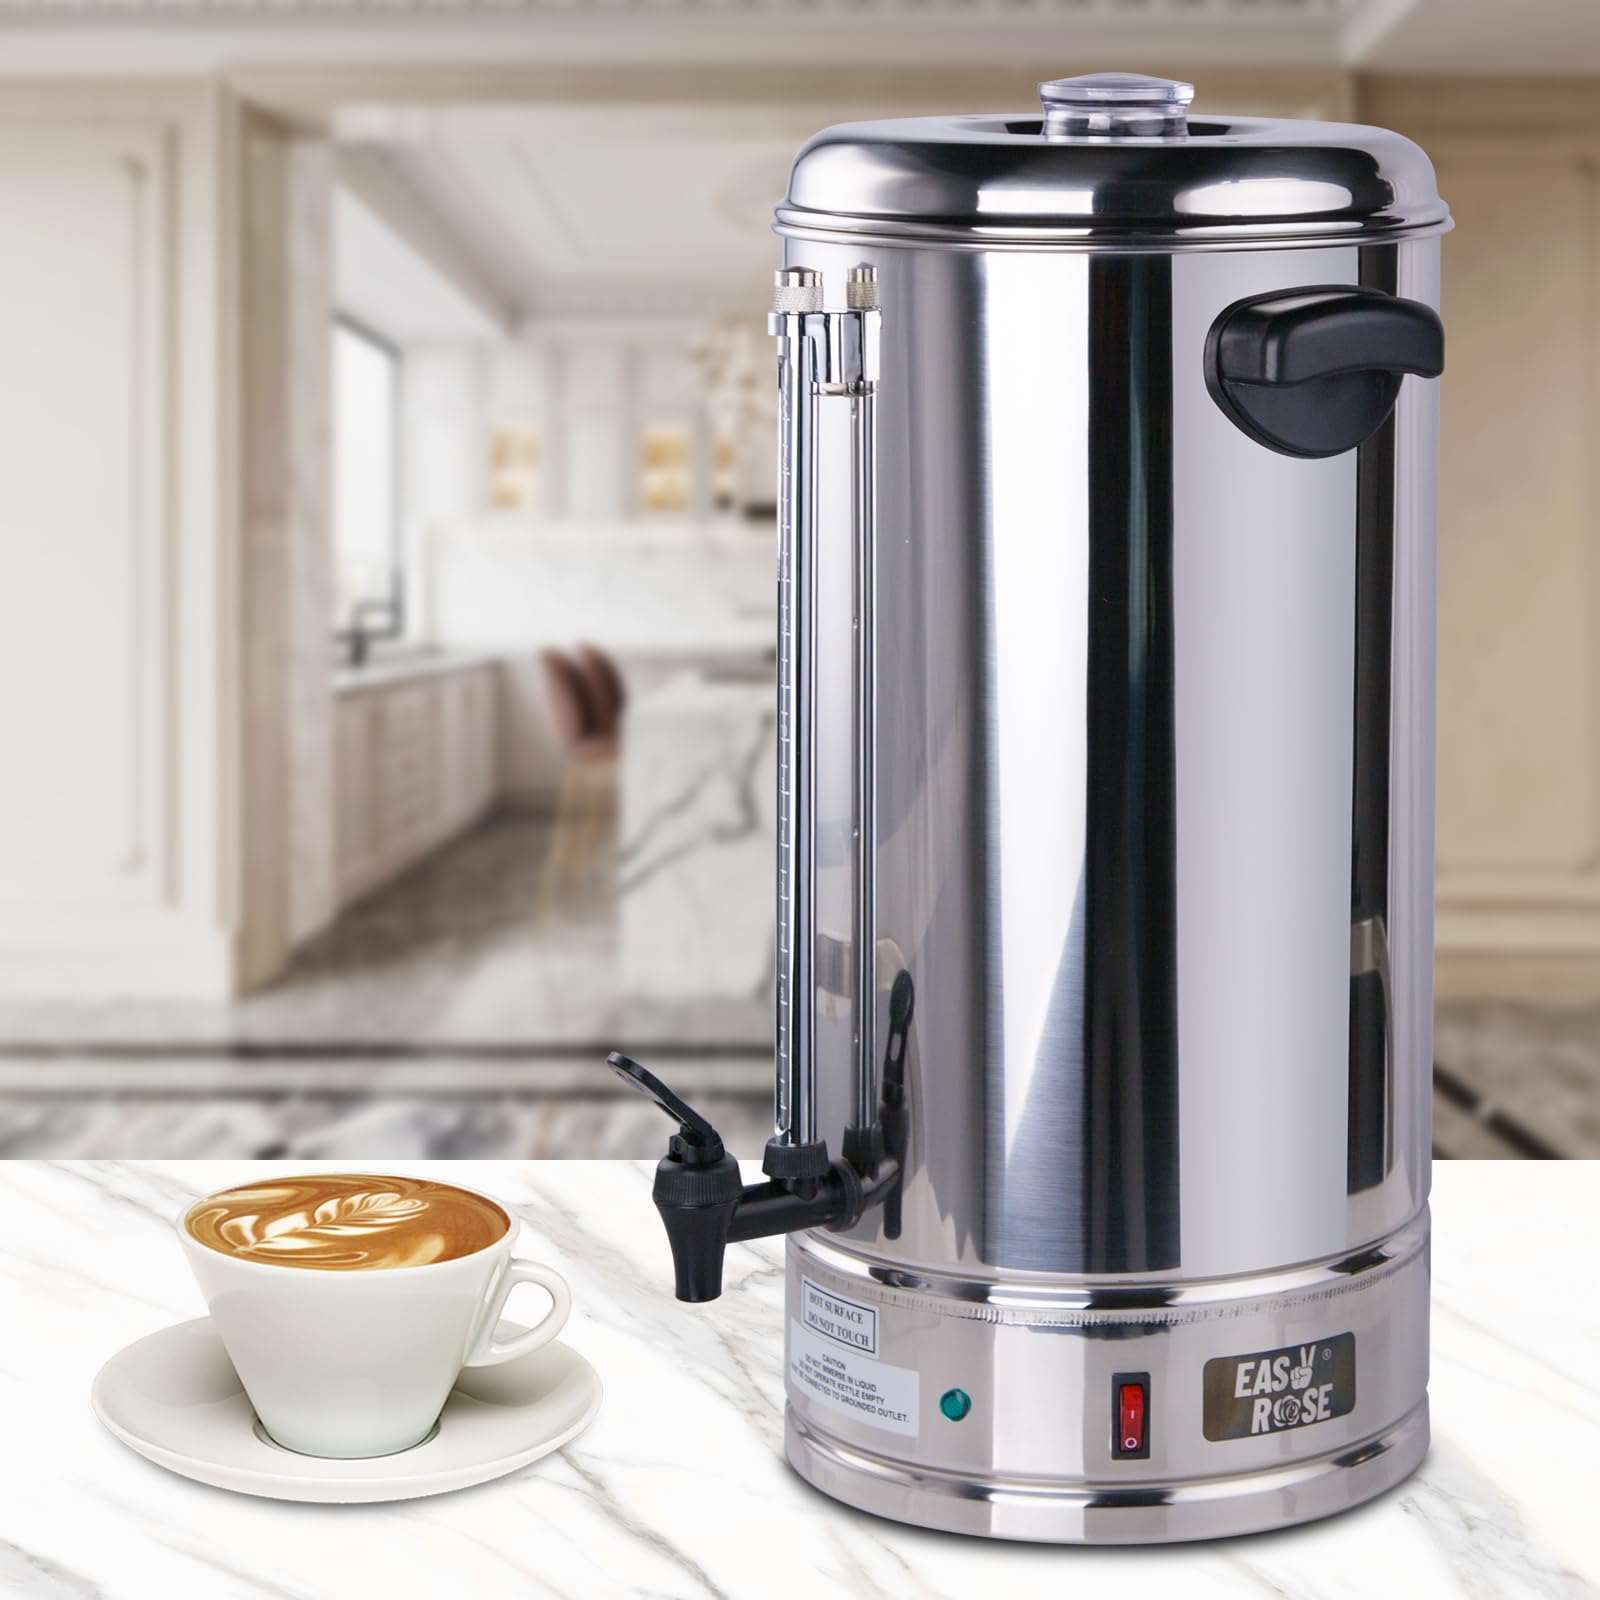 EASYROSE Coffee Urn 100 Cup Coffee Percolator Commercial Coffee Maker with Removable Filter, Perfect For Office, Parties, Catering